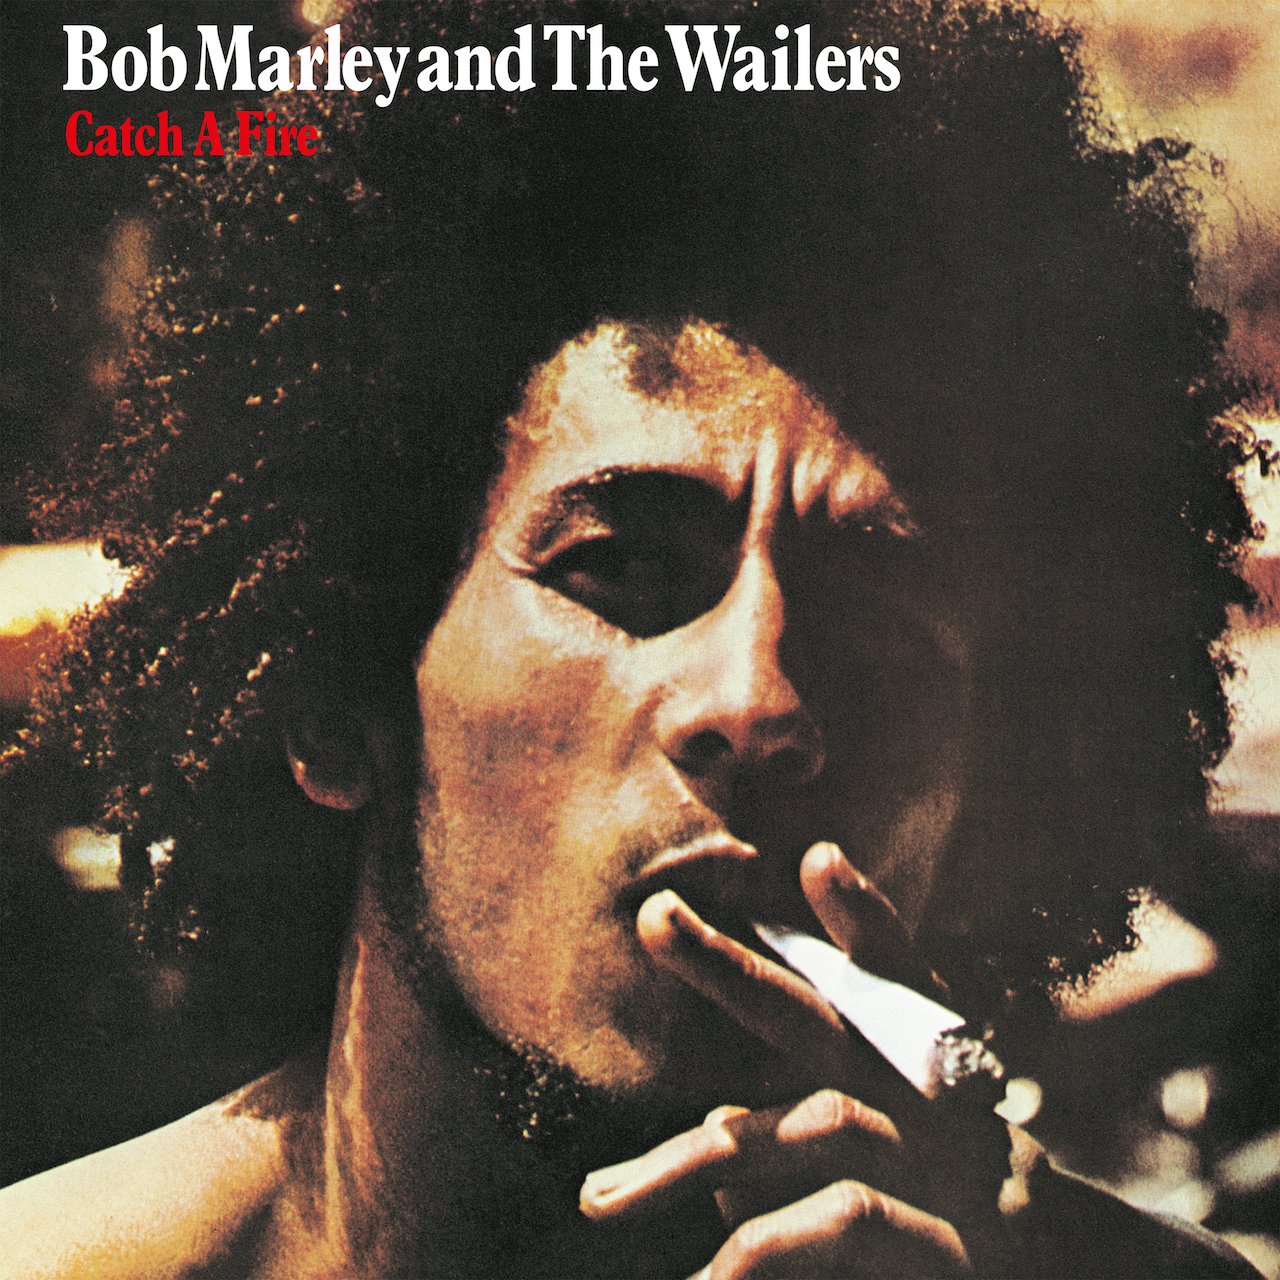 Celebrate The 50th Anniversary Of Bob Marley’s ‘Catch A Fire’ With A New Deluxe Edition